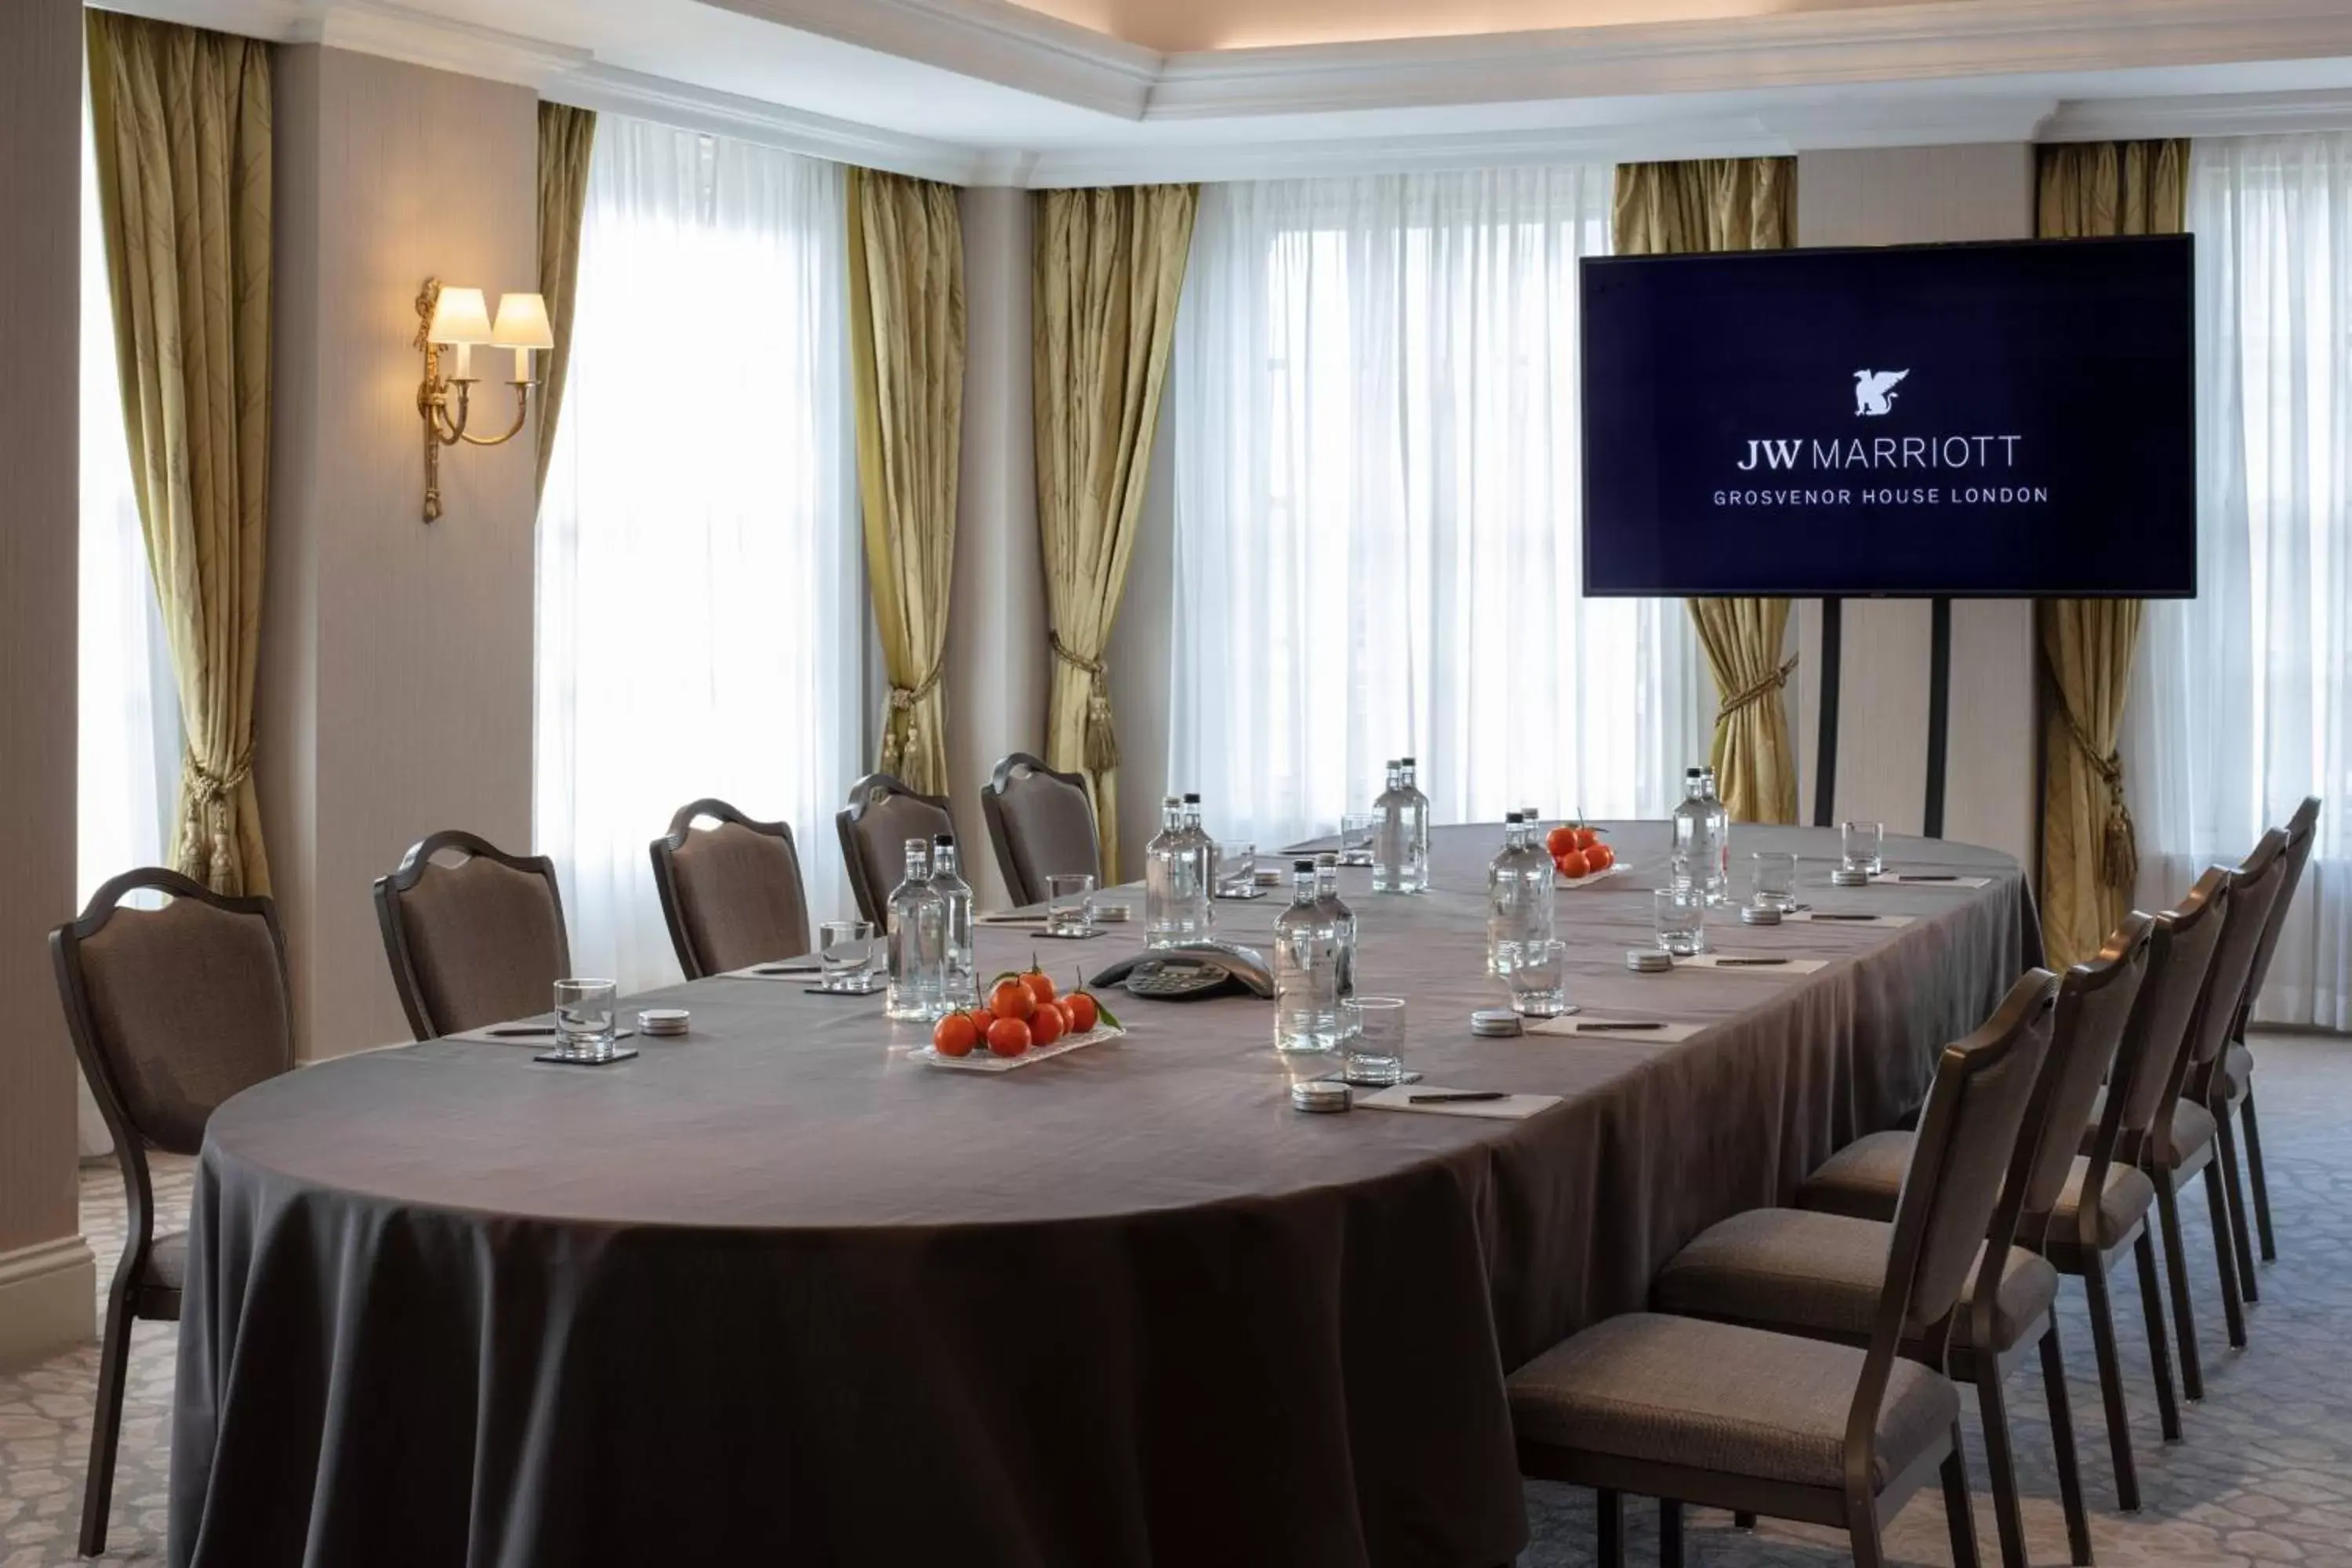 Meeting/conference room in JW Marriott Grosvenor House London